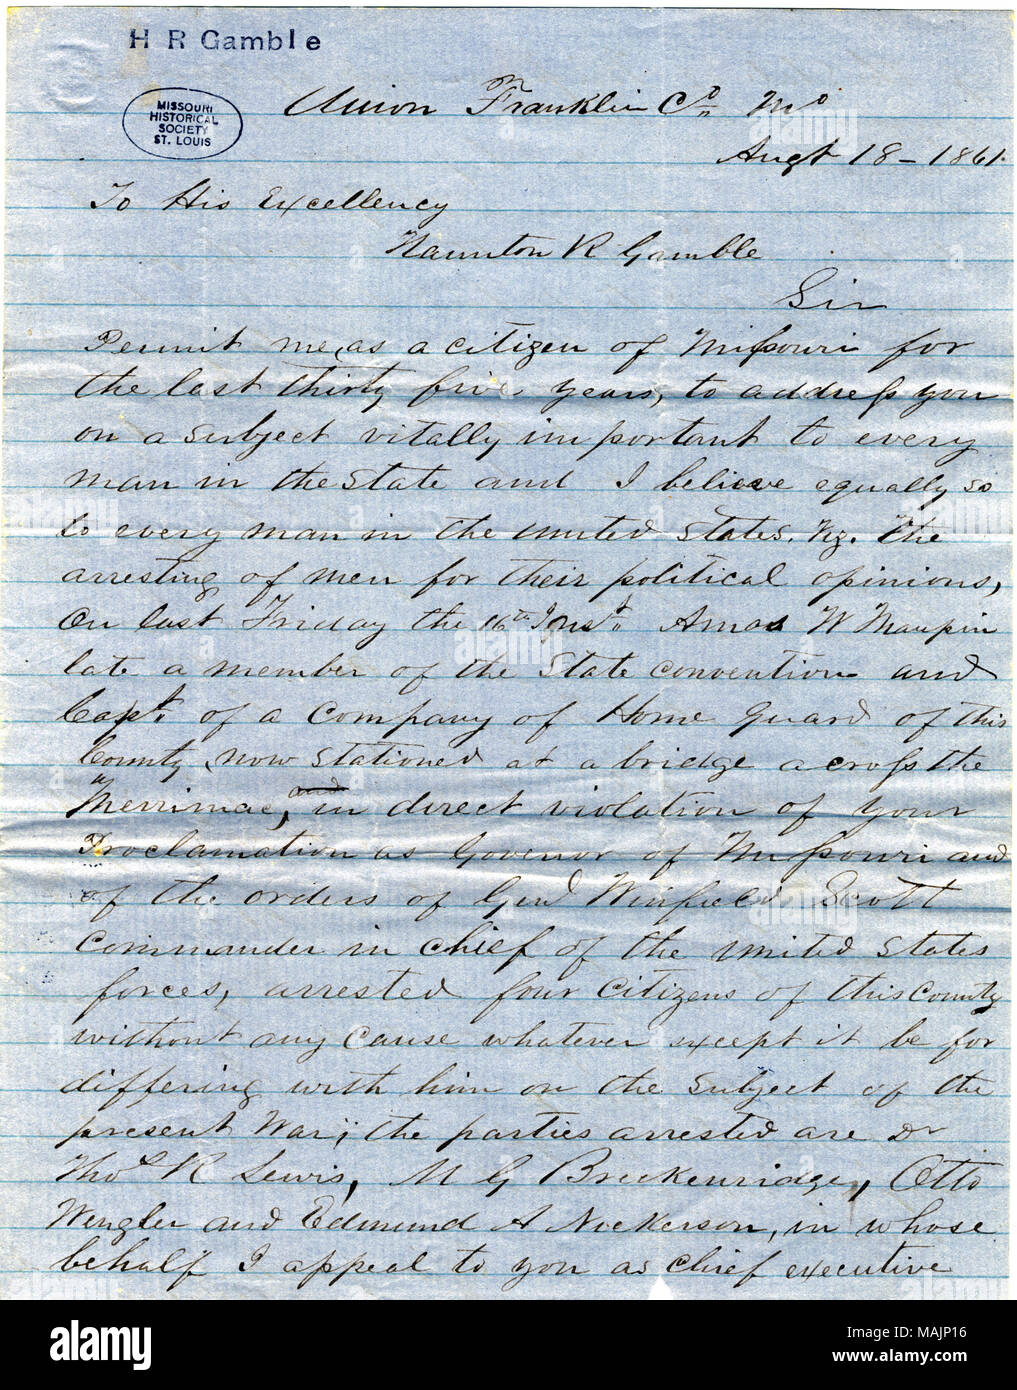 Requests that Gamble intervene in the arrest of four citizens of Franklin County, Missouri, by unit of the Home Guard. Title: Letter signed E.B. Dobyns, Union, Franklin Co., Mo., to Hamilton R. Gamble, August 18, 1861  . 18 August 1861. Dobyns, E. B. Stock Photo